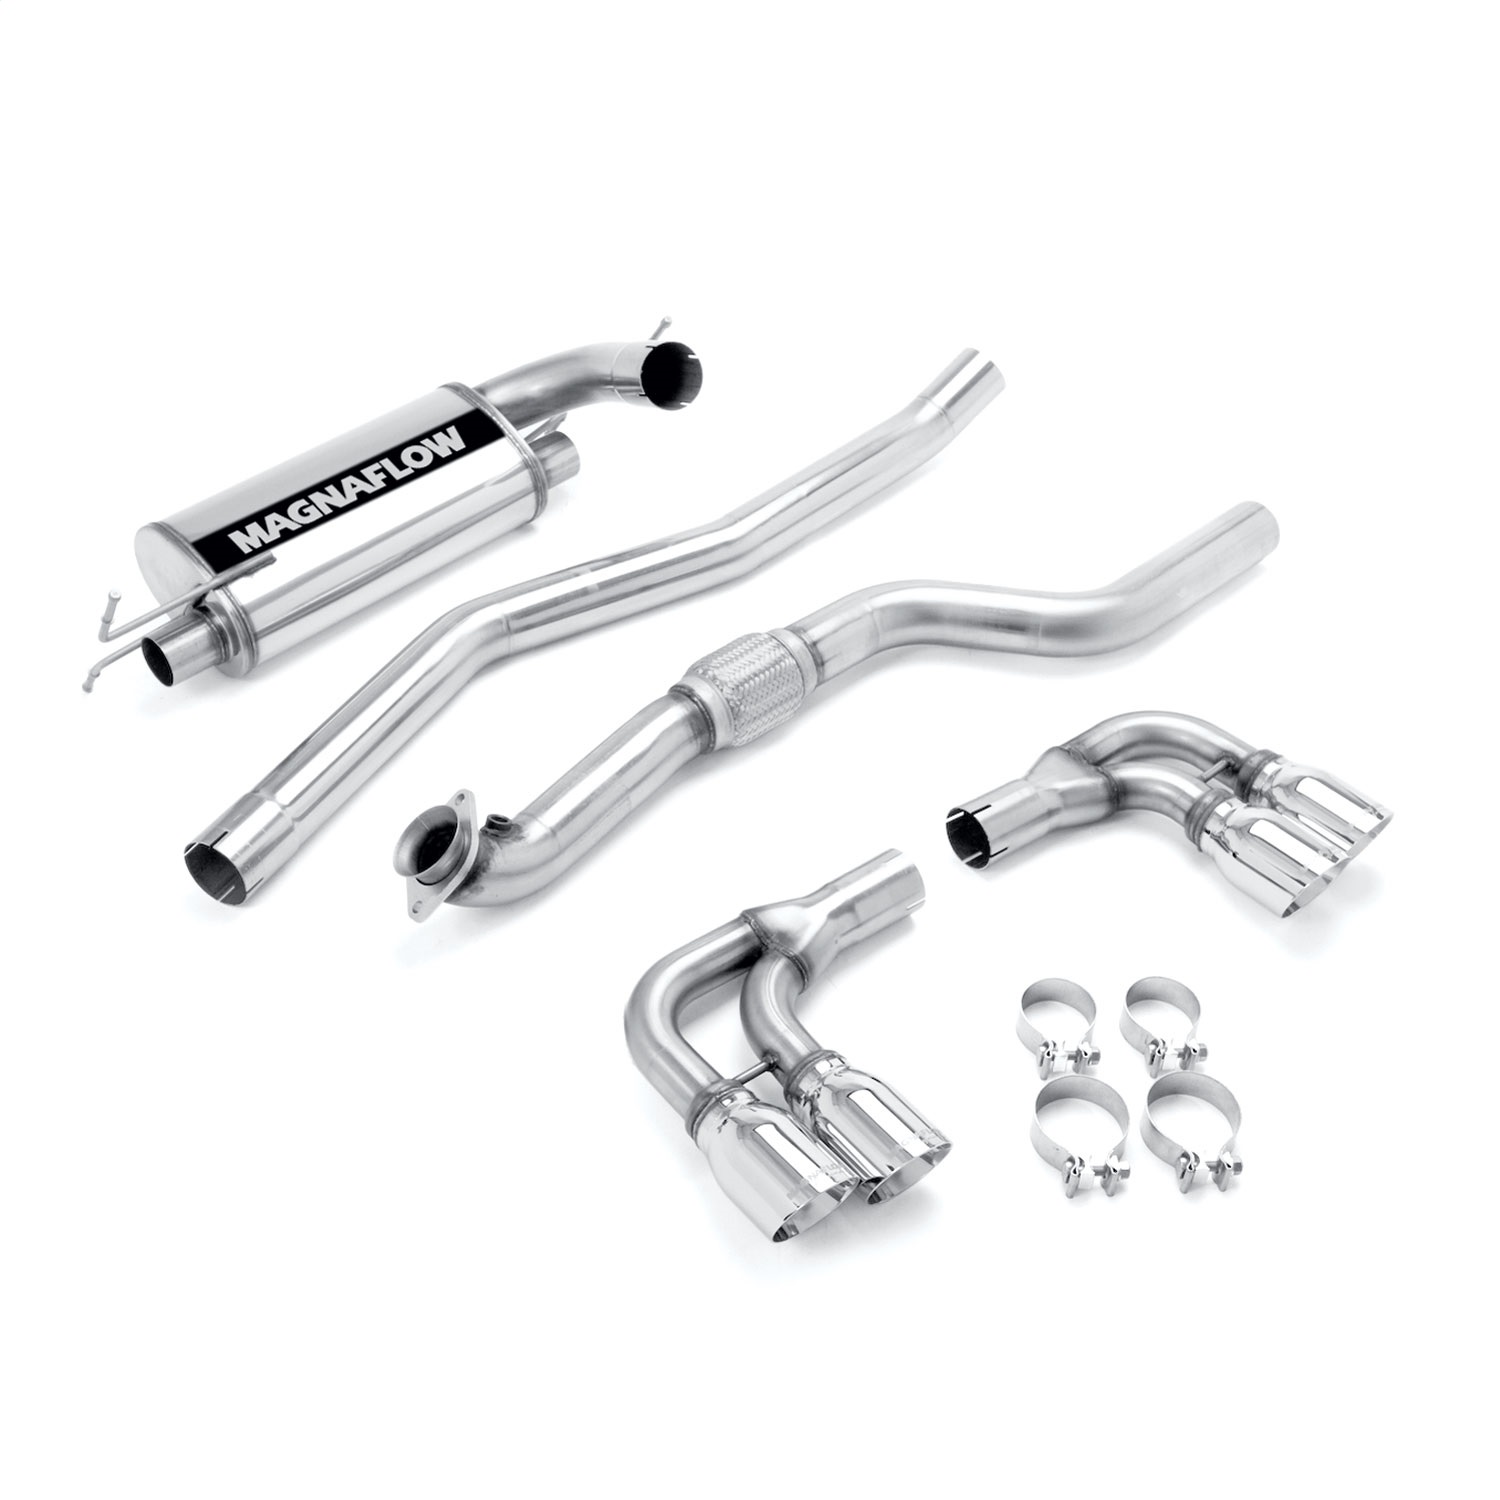 MagnaFlow Exhaust Products Magnaflow Performance Exhaust 16761 Exhaust System Kit